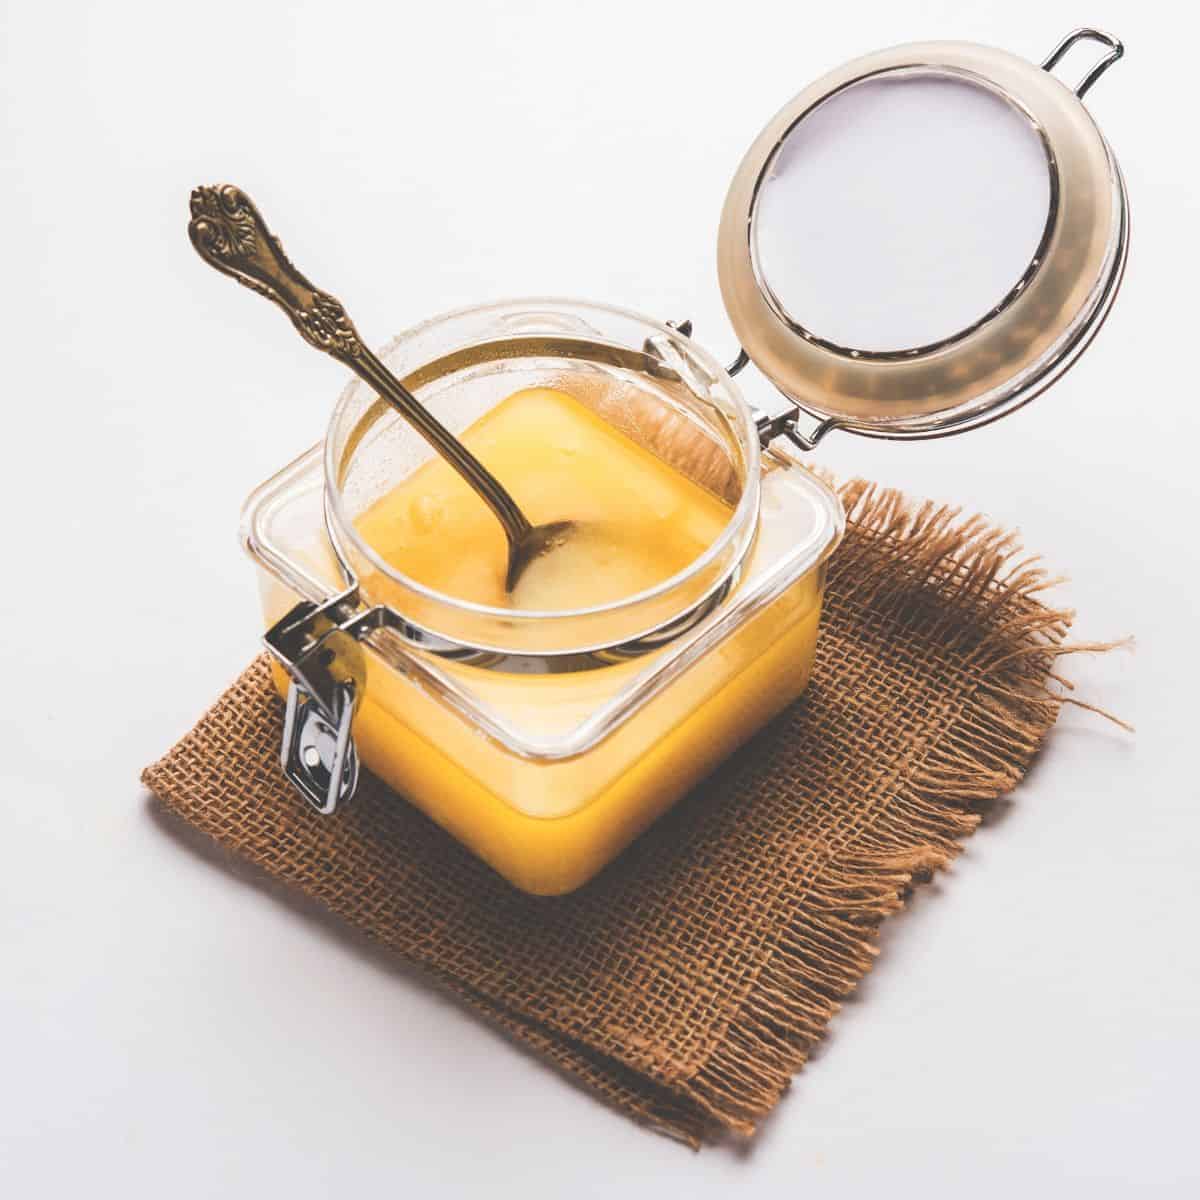 How to Make Clarified Butter in Two Easy Ways